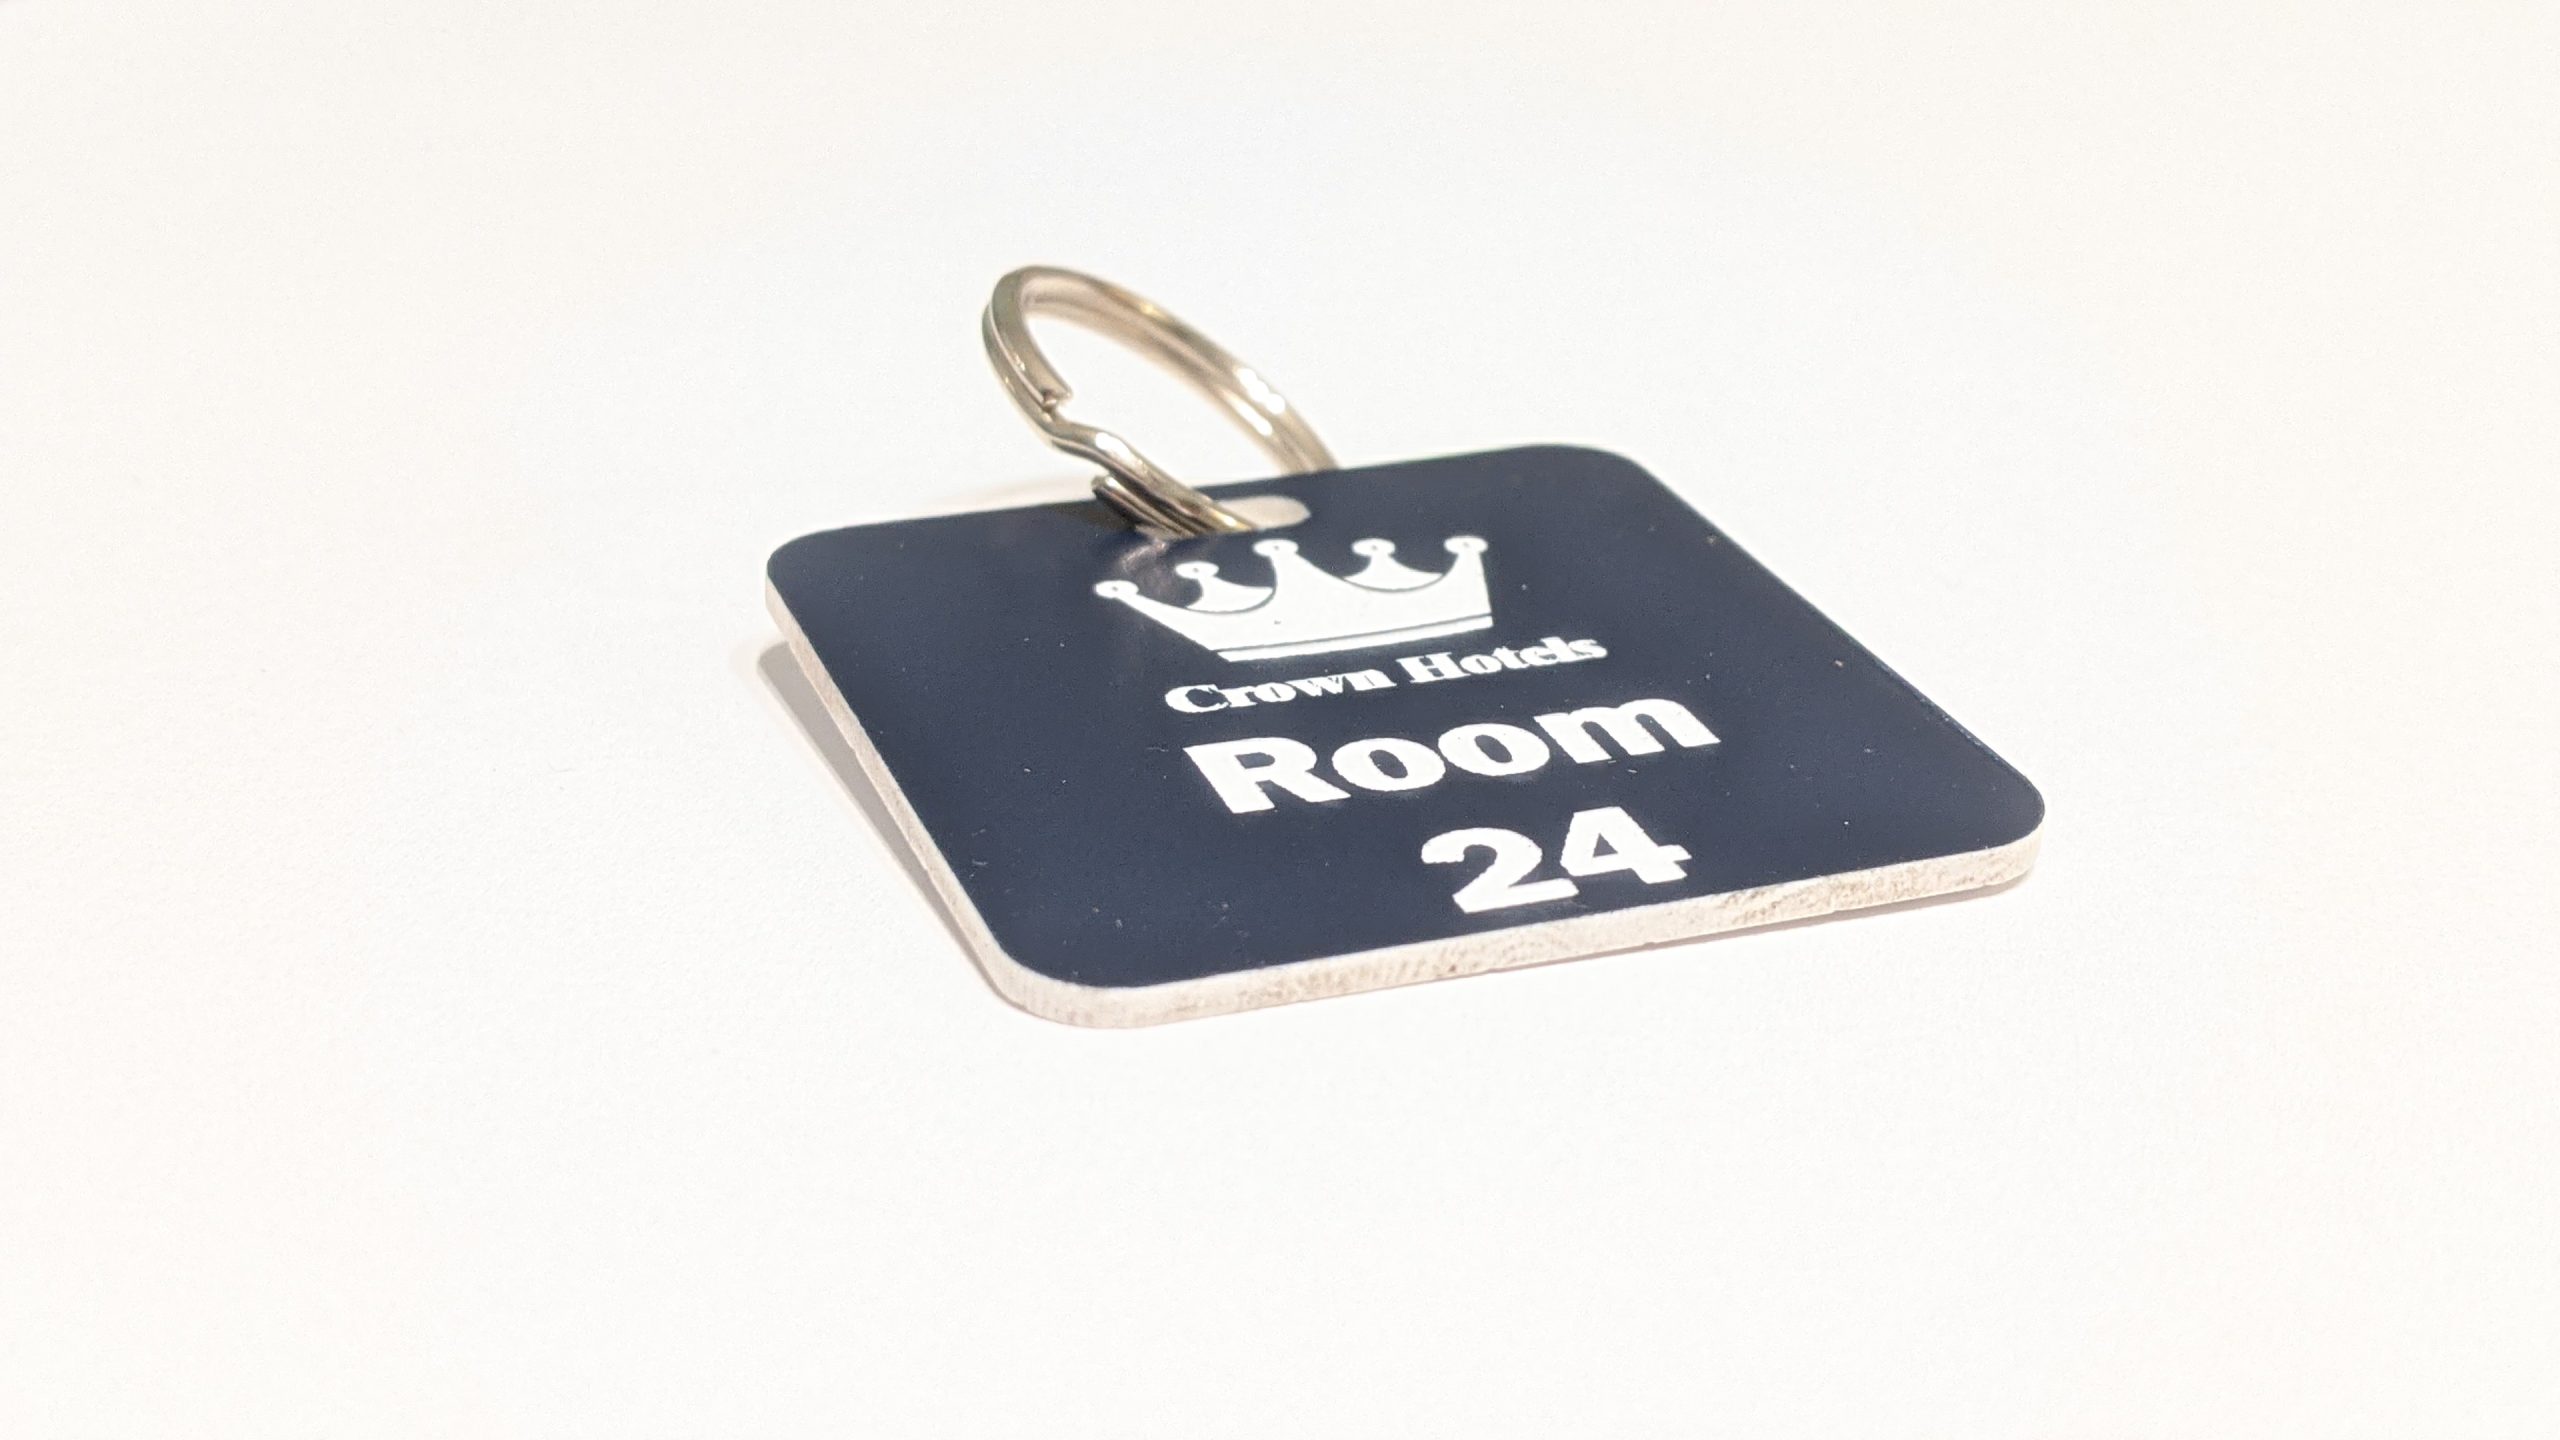 Navy Blue keyring with white text showing a crown logo and a door number